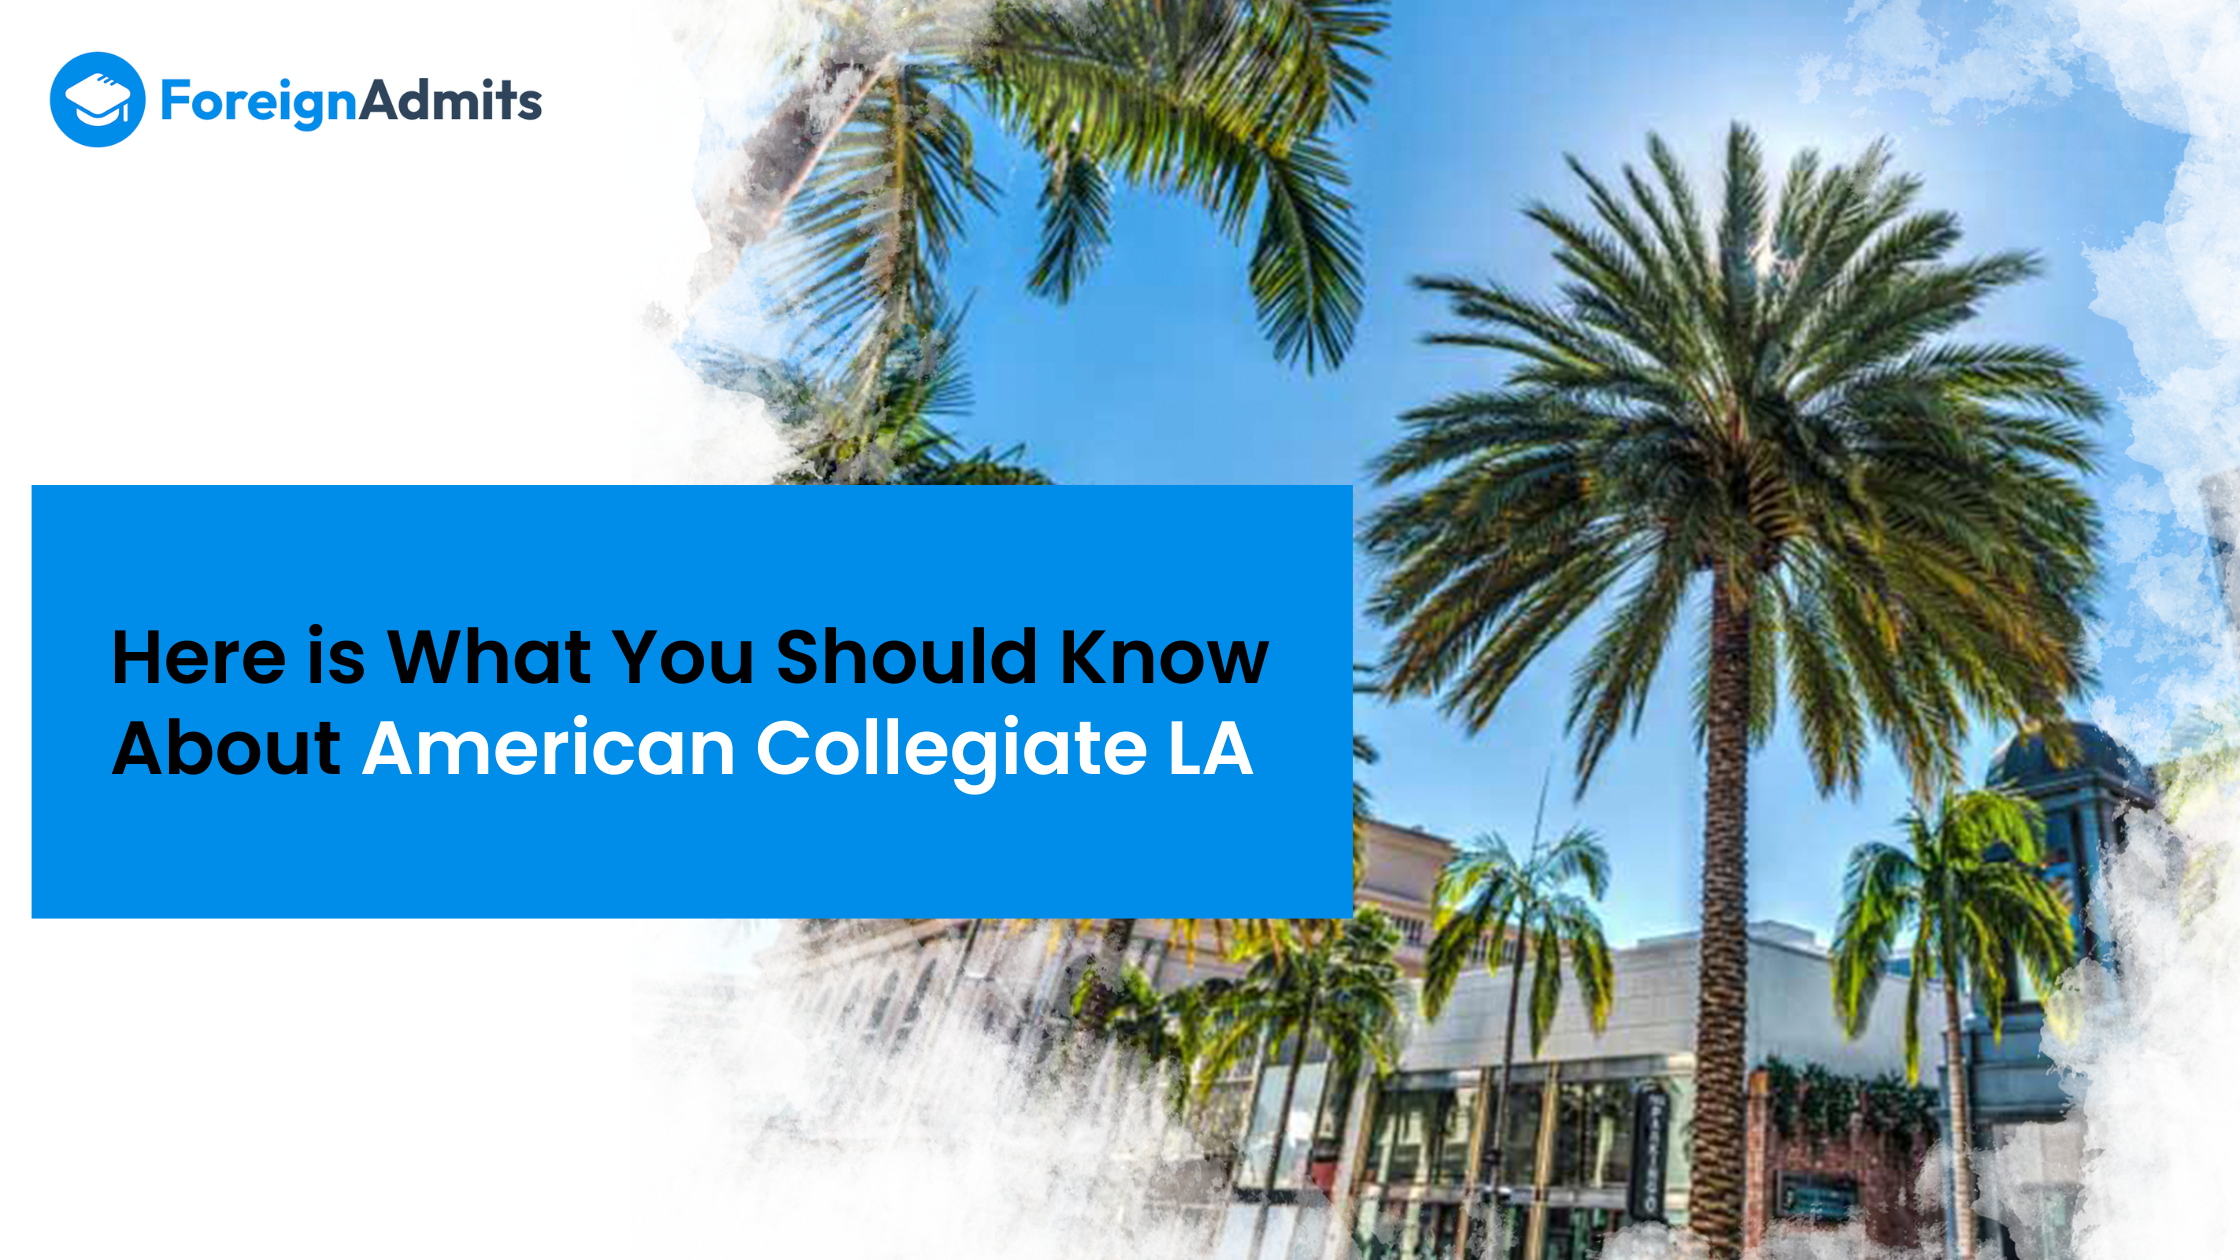 Here is What You Should Know About American Collegiate LA